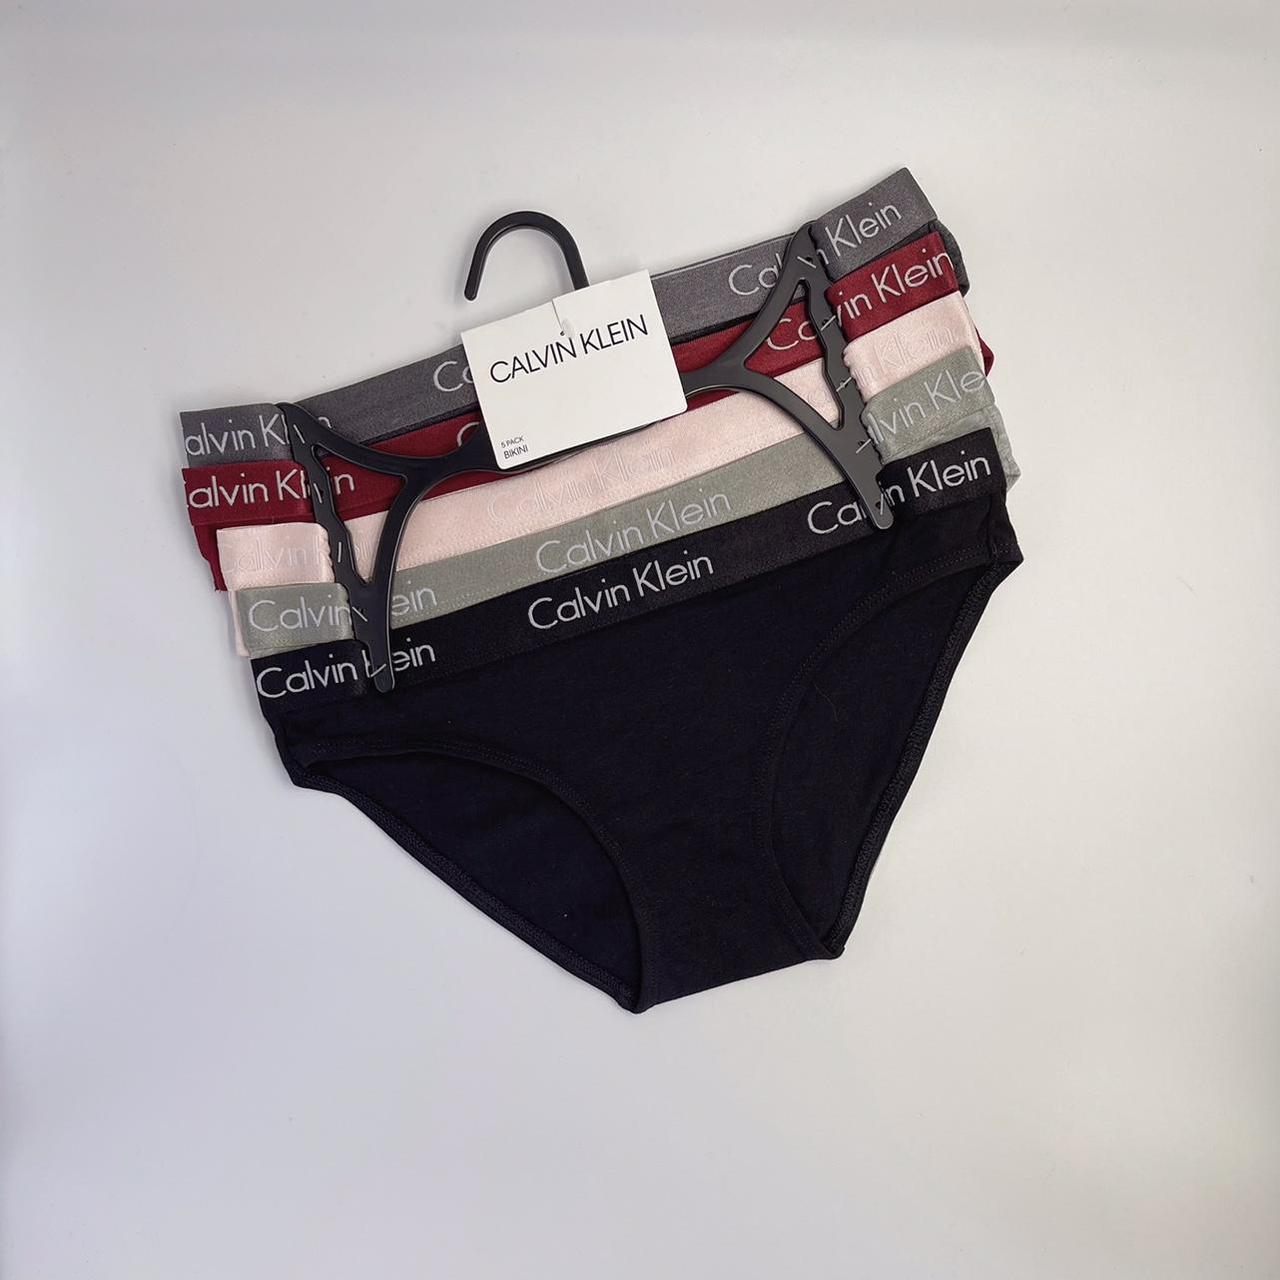 You're getting Authentic NEW Calvin Klein Stretch - Depop